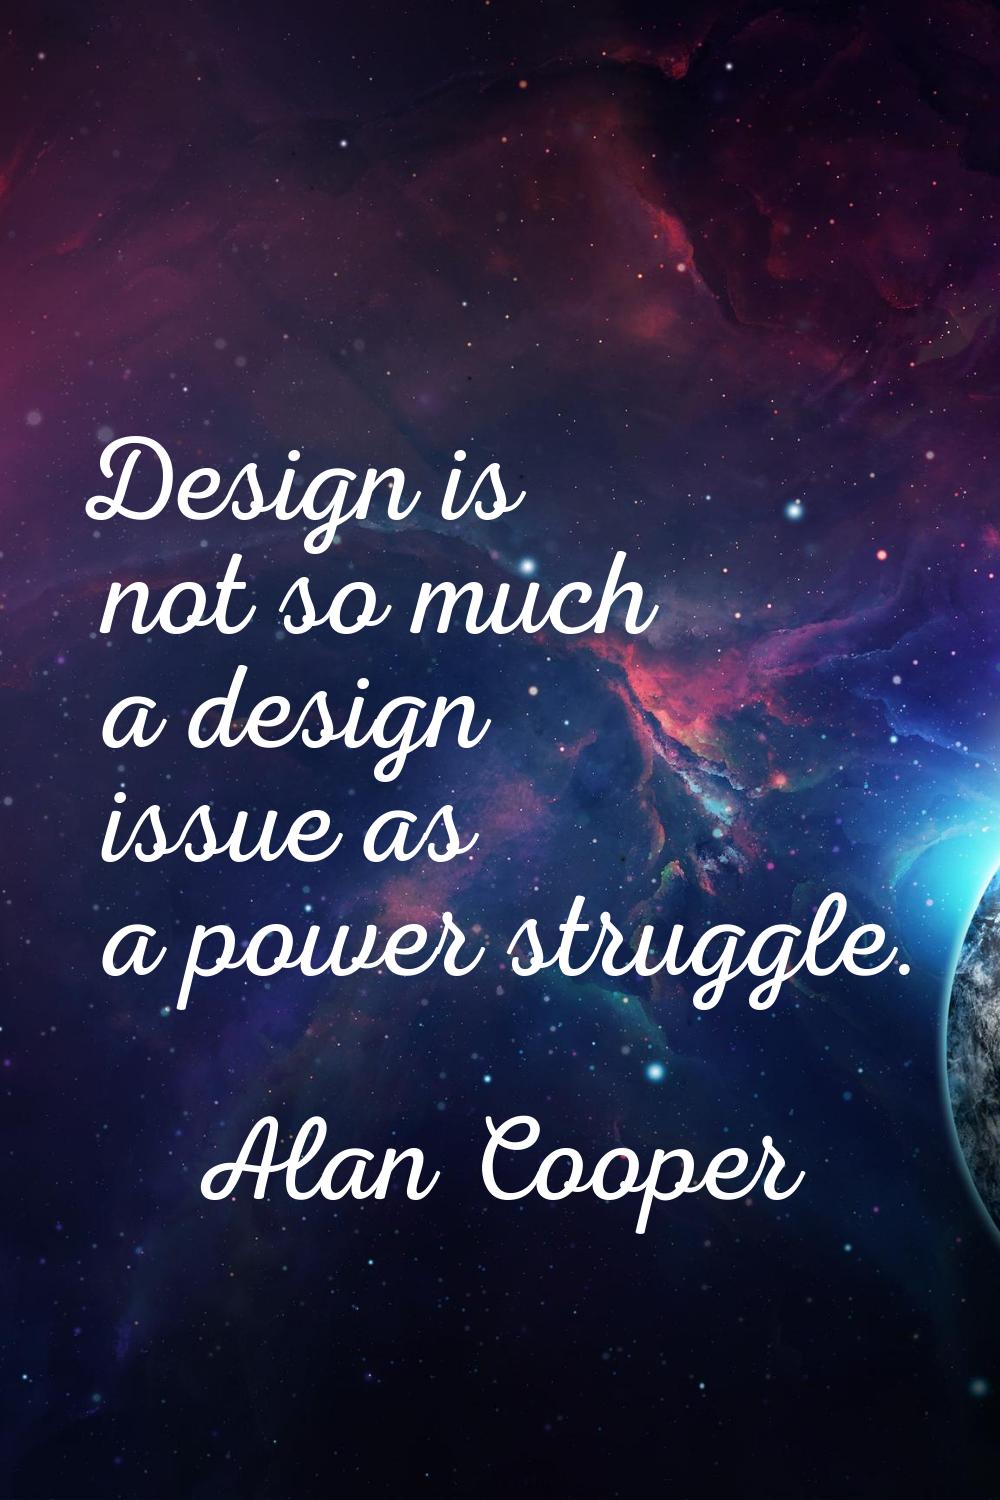 Design is not so much a design issue as a power struggle.